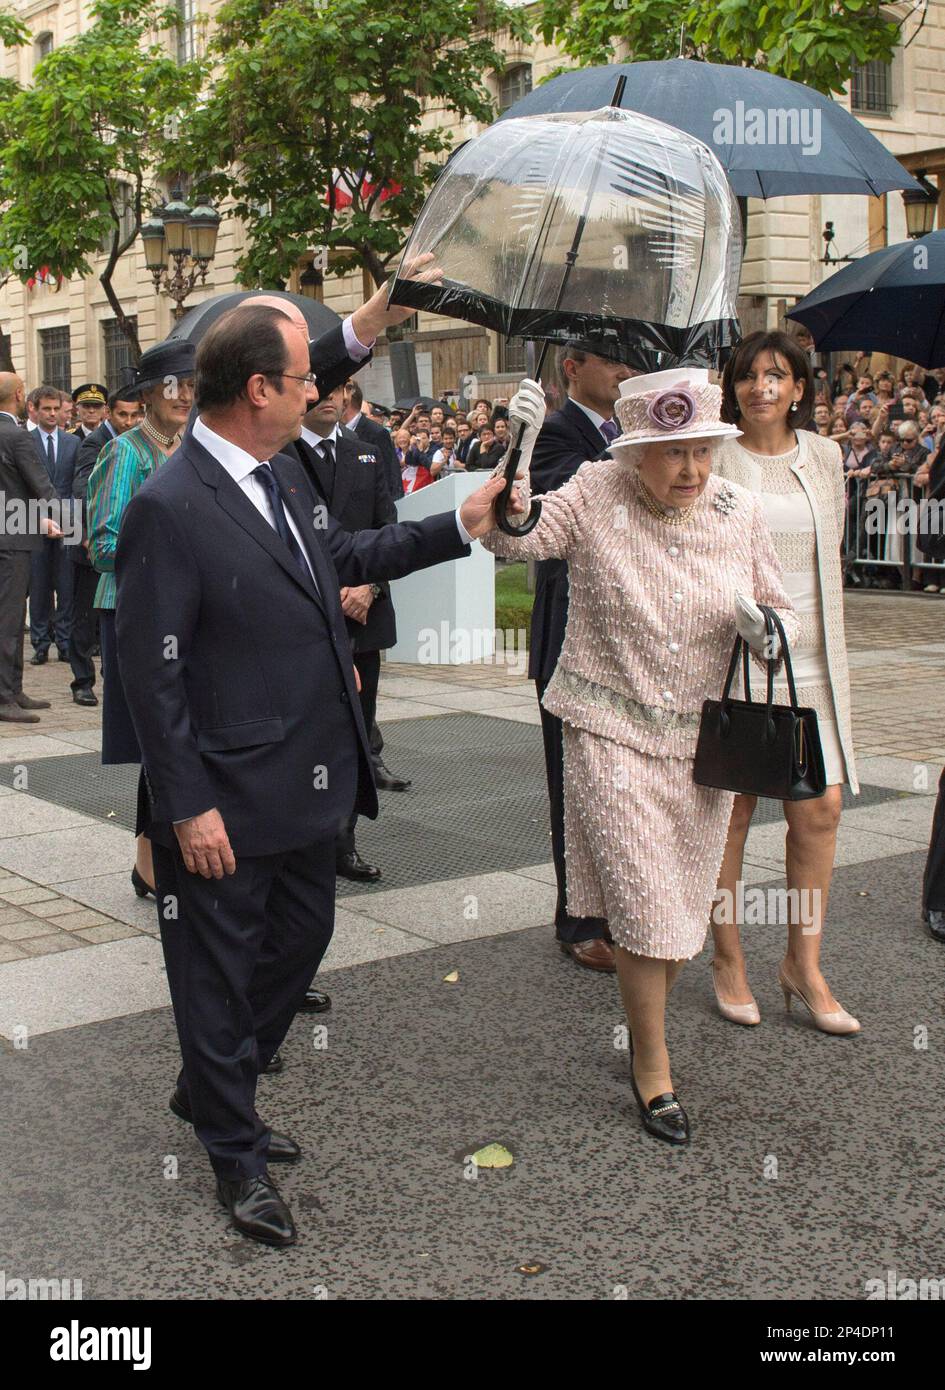 Queen Elizabeth II visits Paris Flower Market on June 7, 2014 in Paris,  France. Queen Elizabeth II and Prince Philip, Duke of Edinburgh are on the  final day of a three day